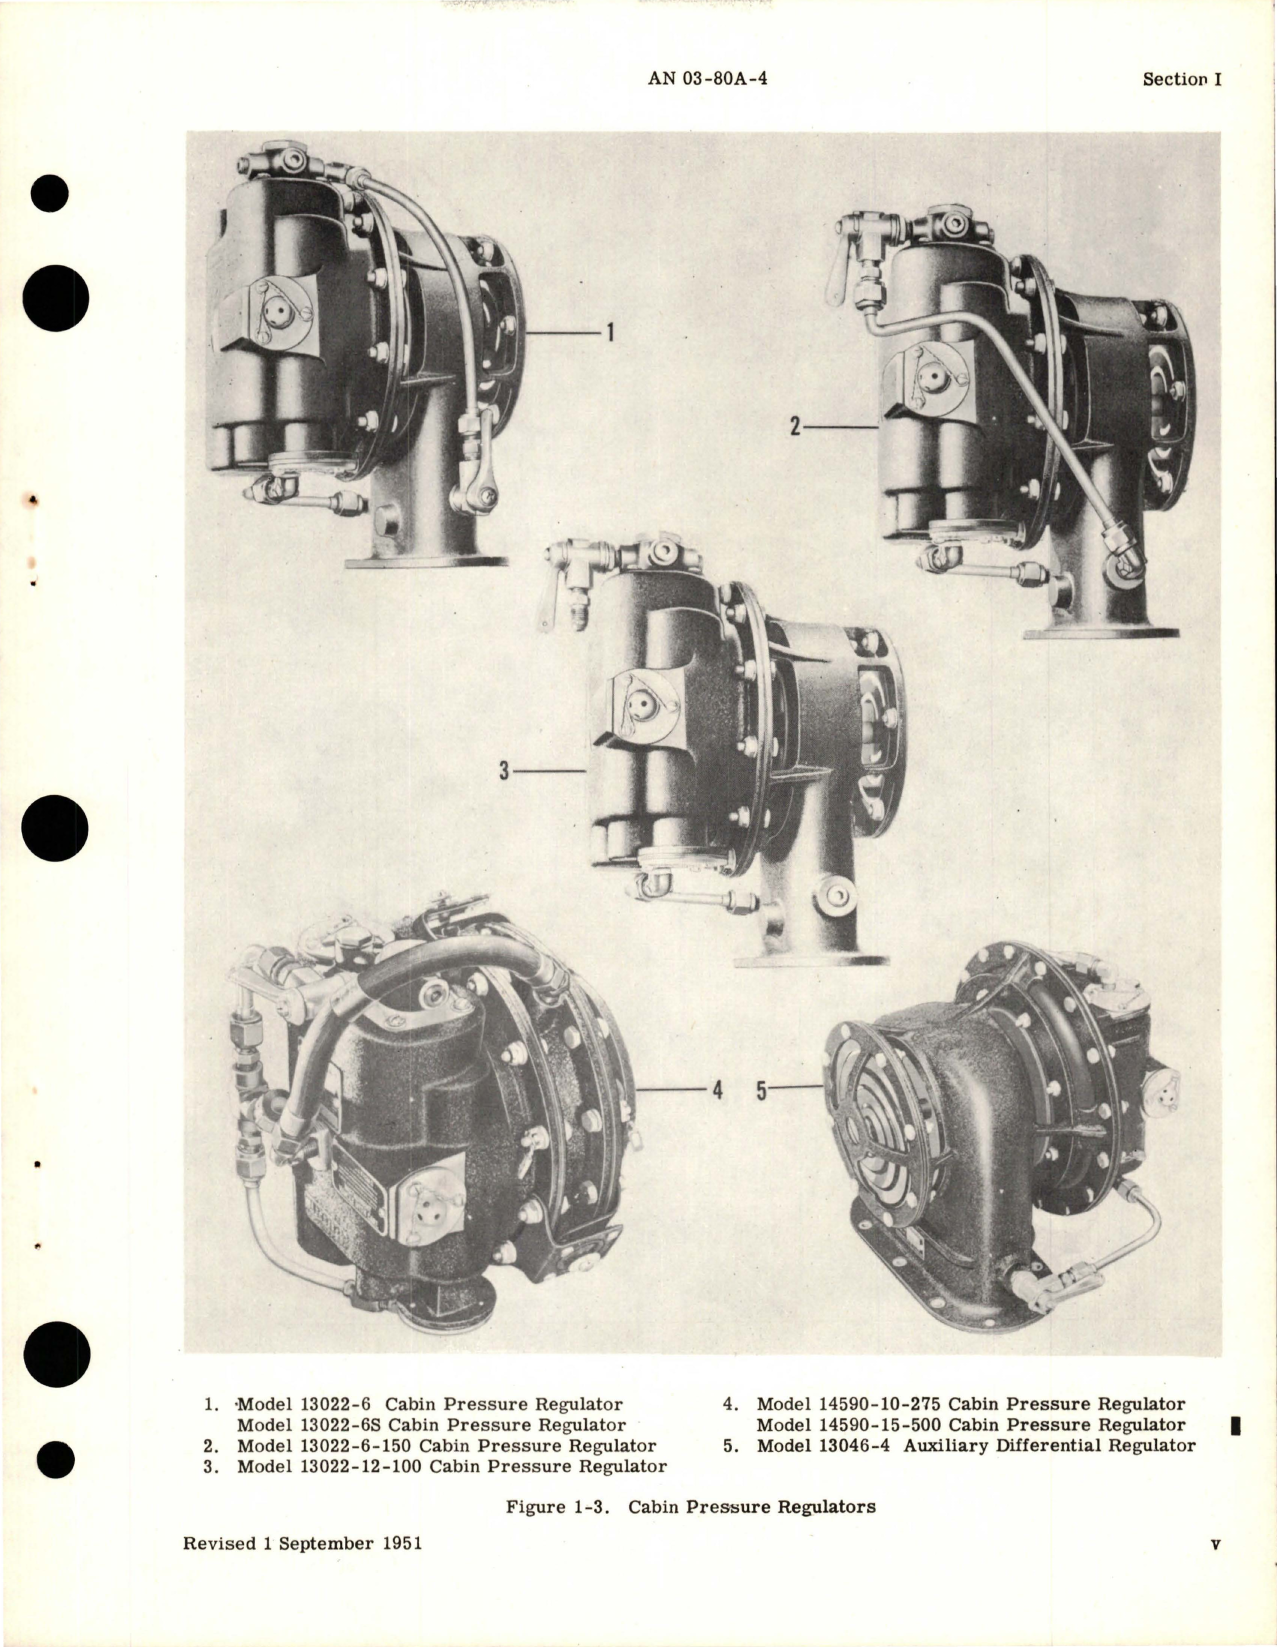 Sample page 7 from AirCorps Library document: Overhaul Instructions for Cabin Pressure Regulators